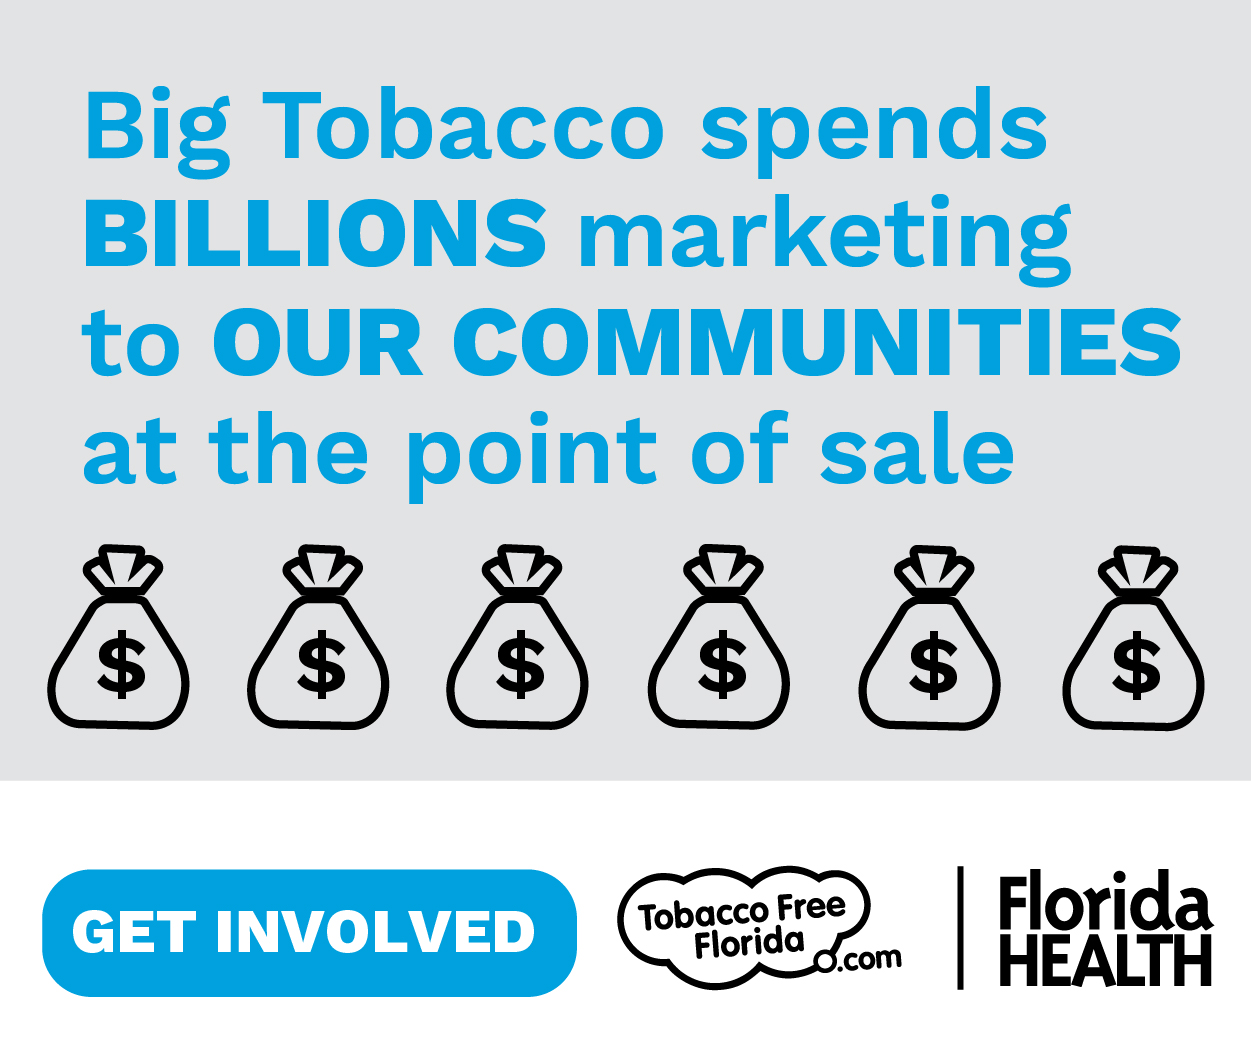 Big Tobacco spends billions marketing to our communities at the point of sale/ $$$$$$ Get Involved Tobacco Free Florida.com and Florida Health